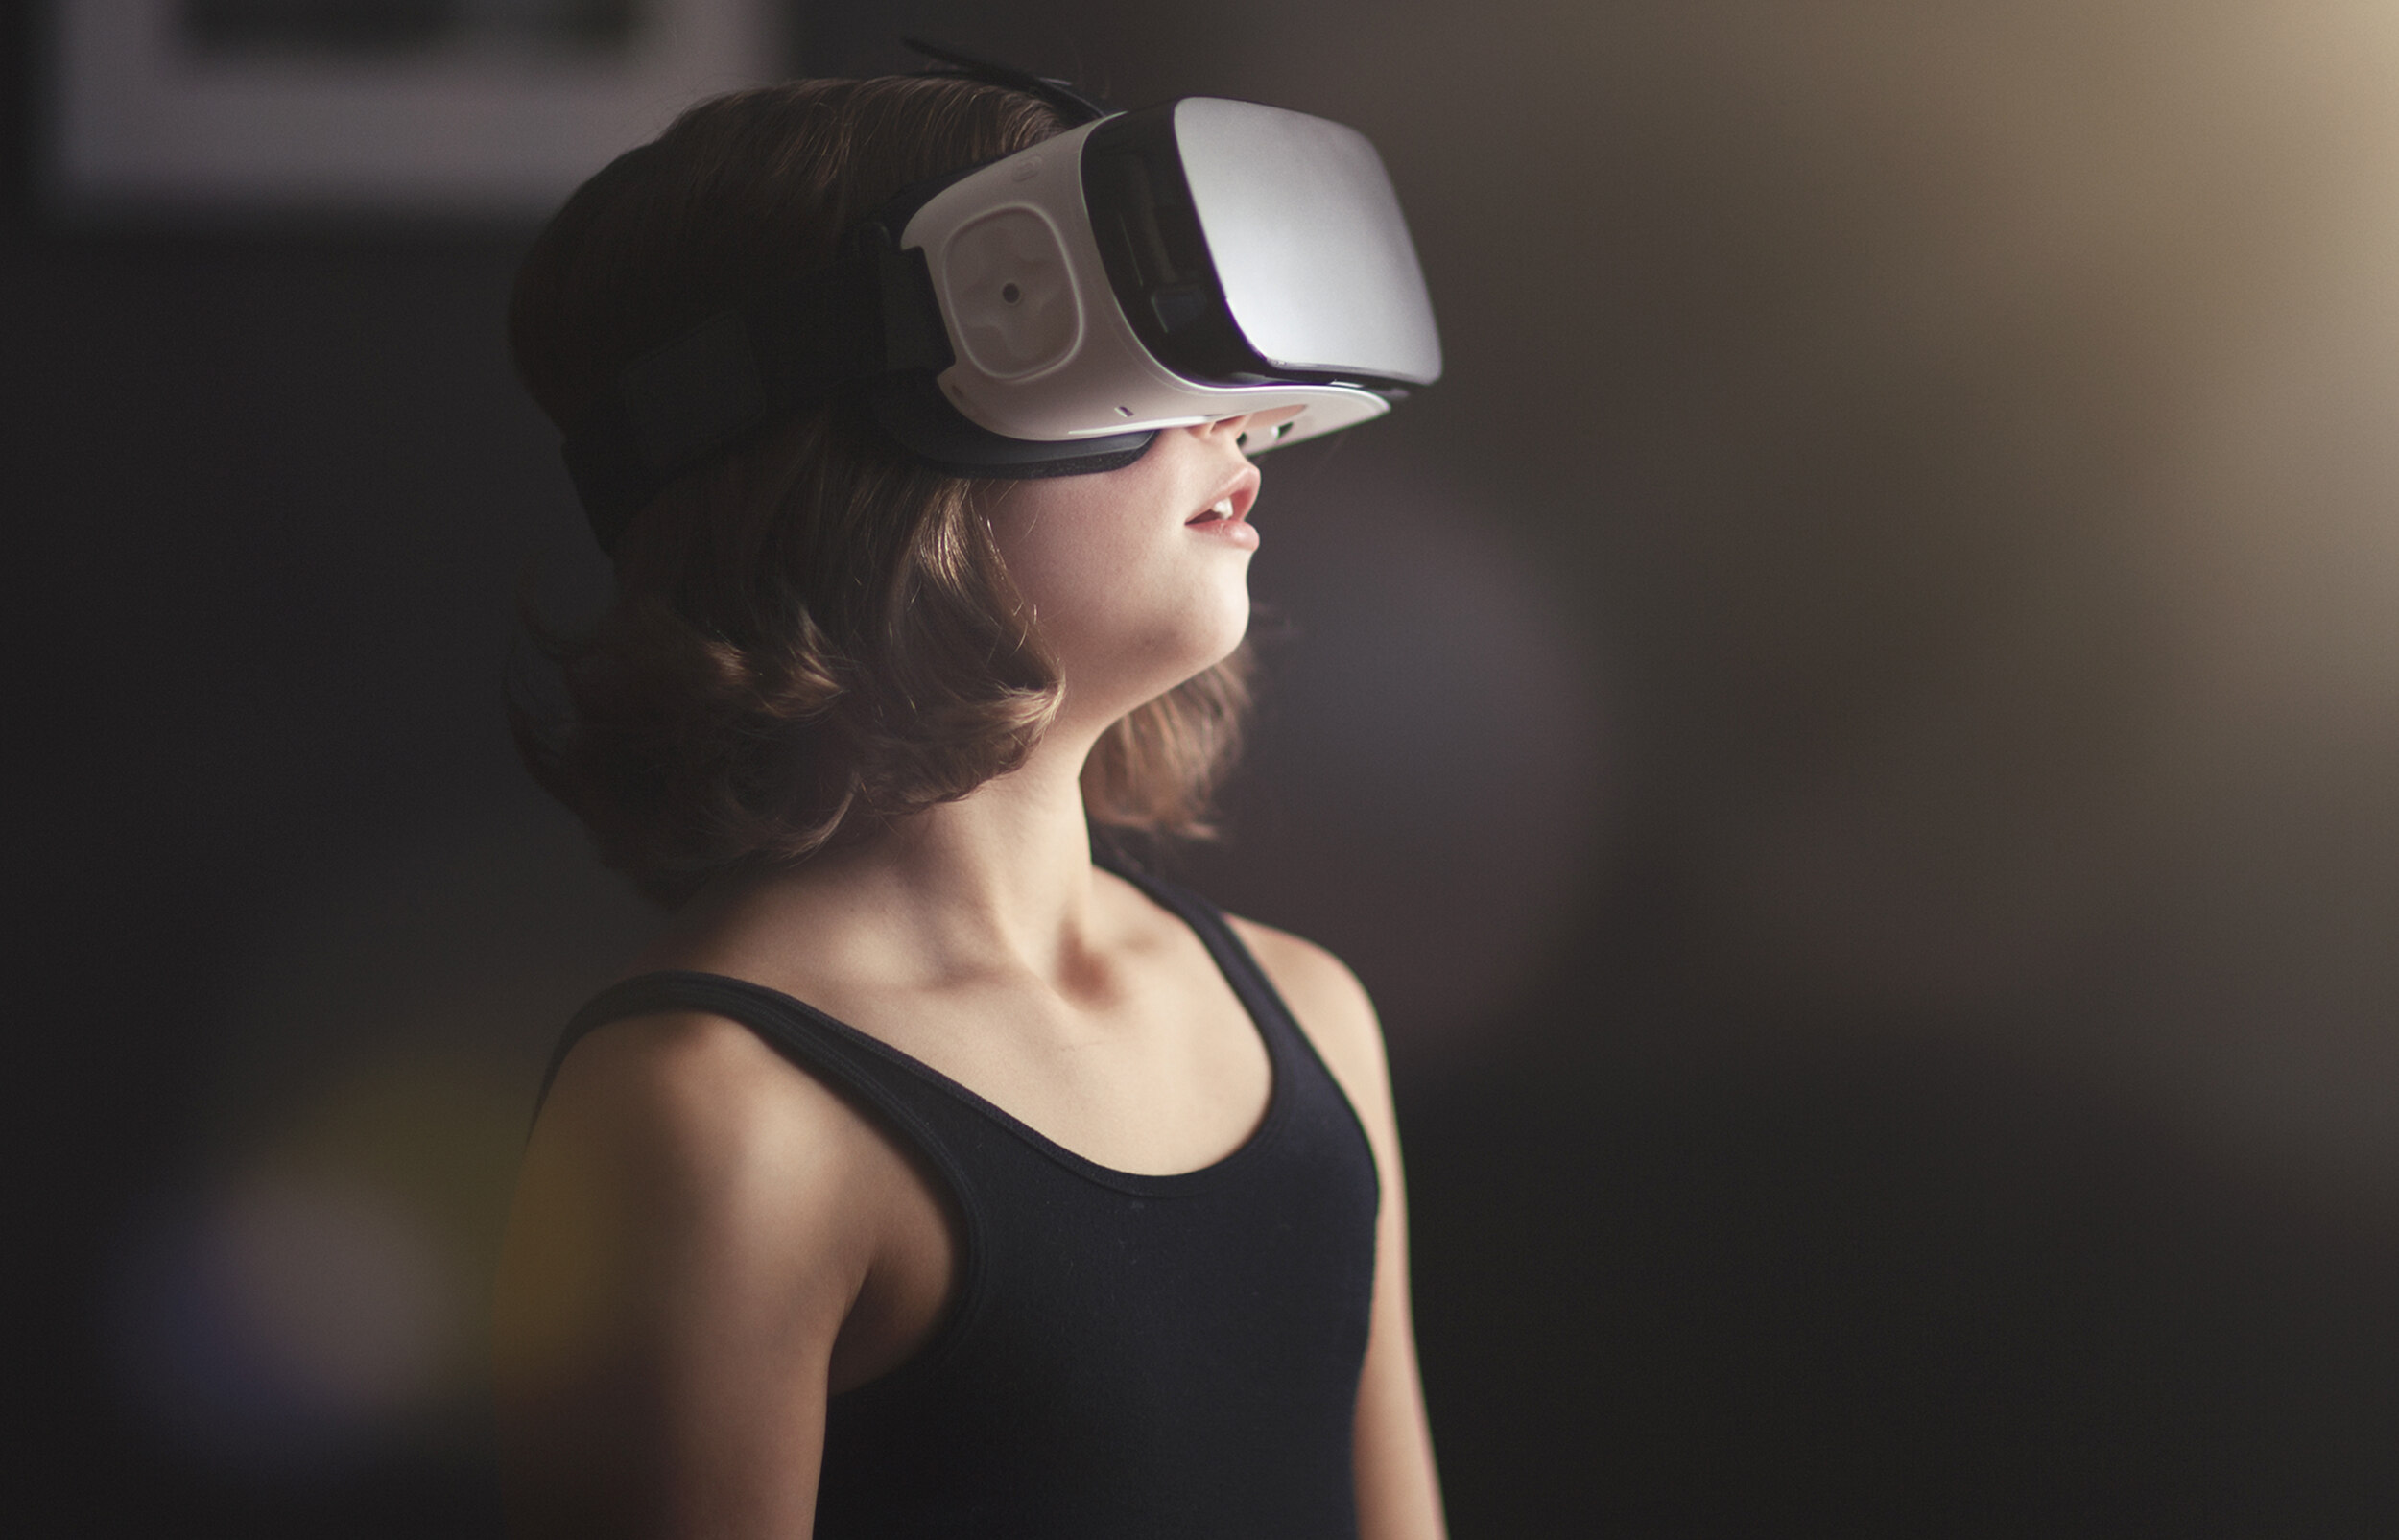 the-dangers-of-vr-for-kids